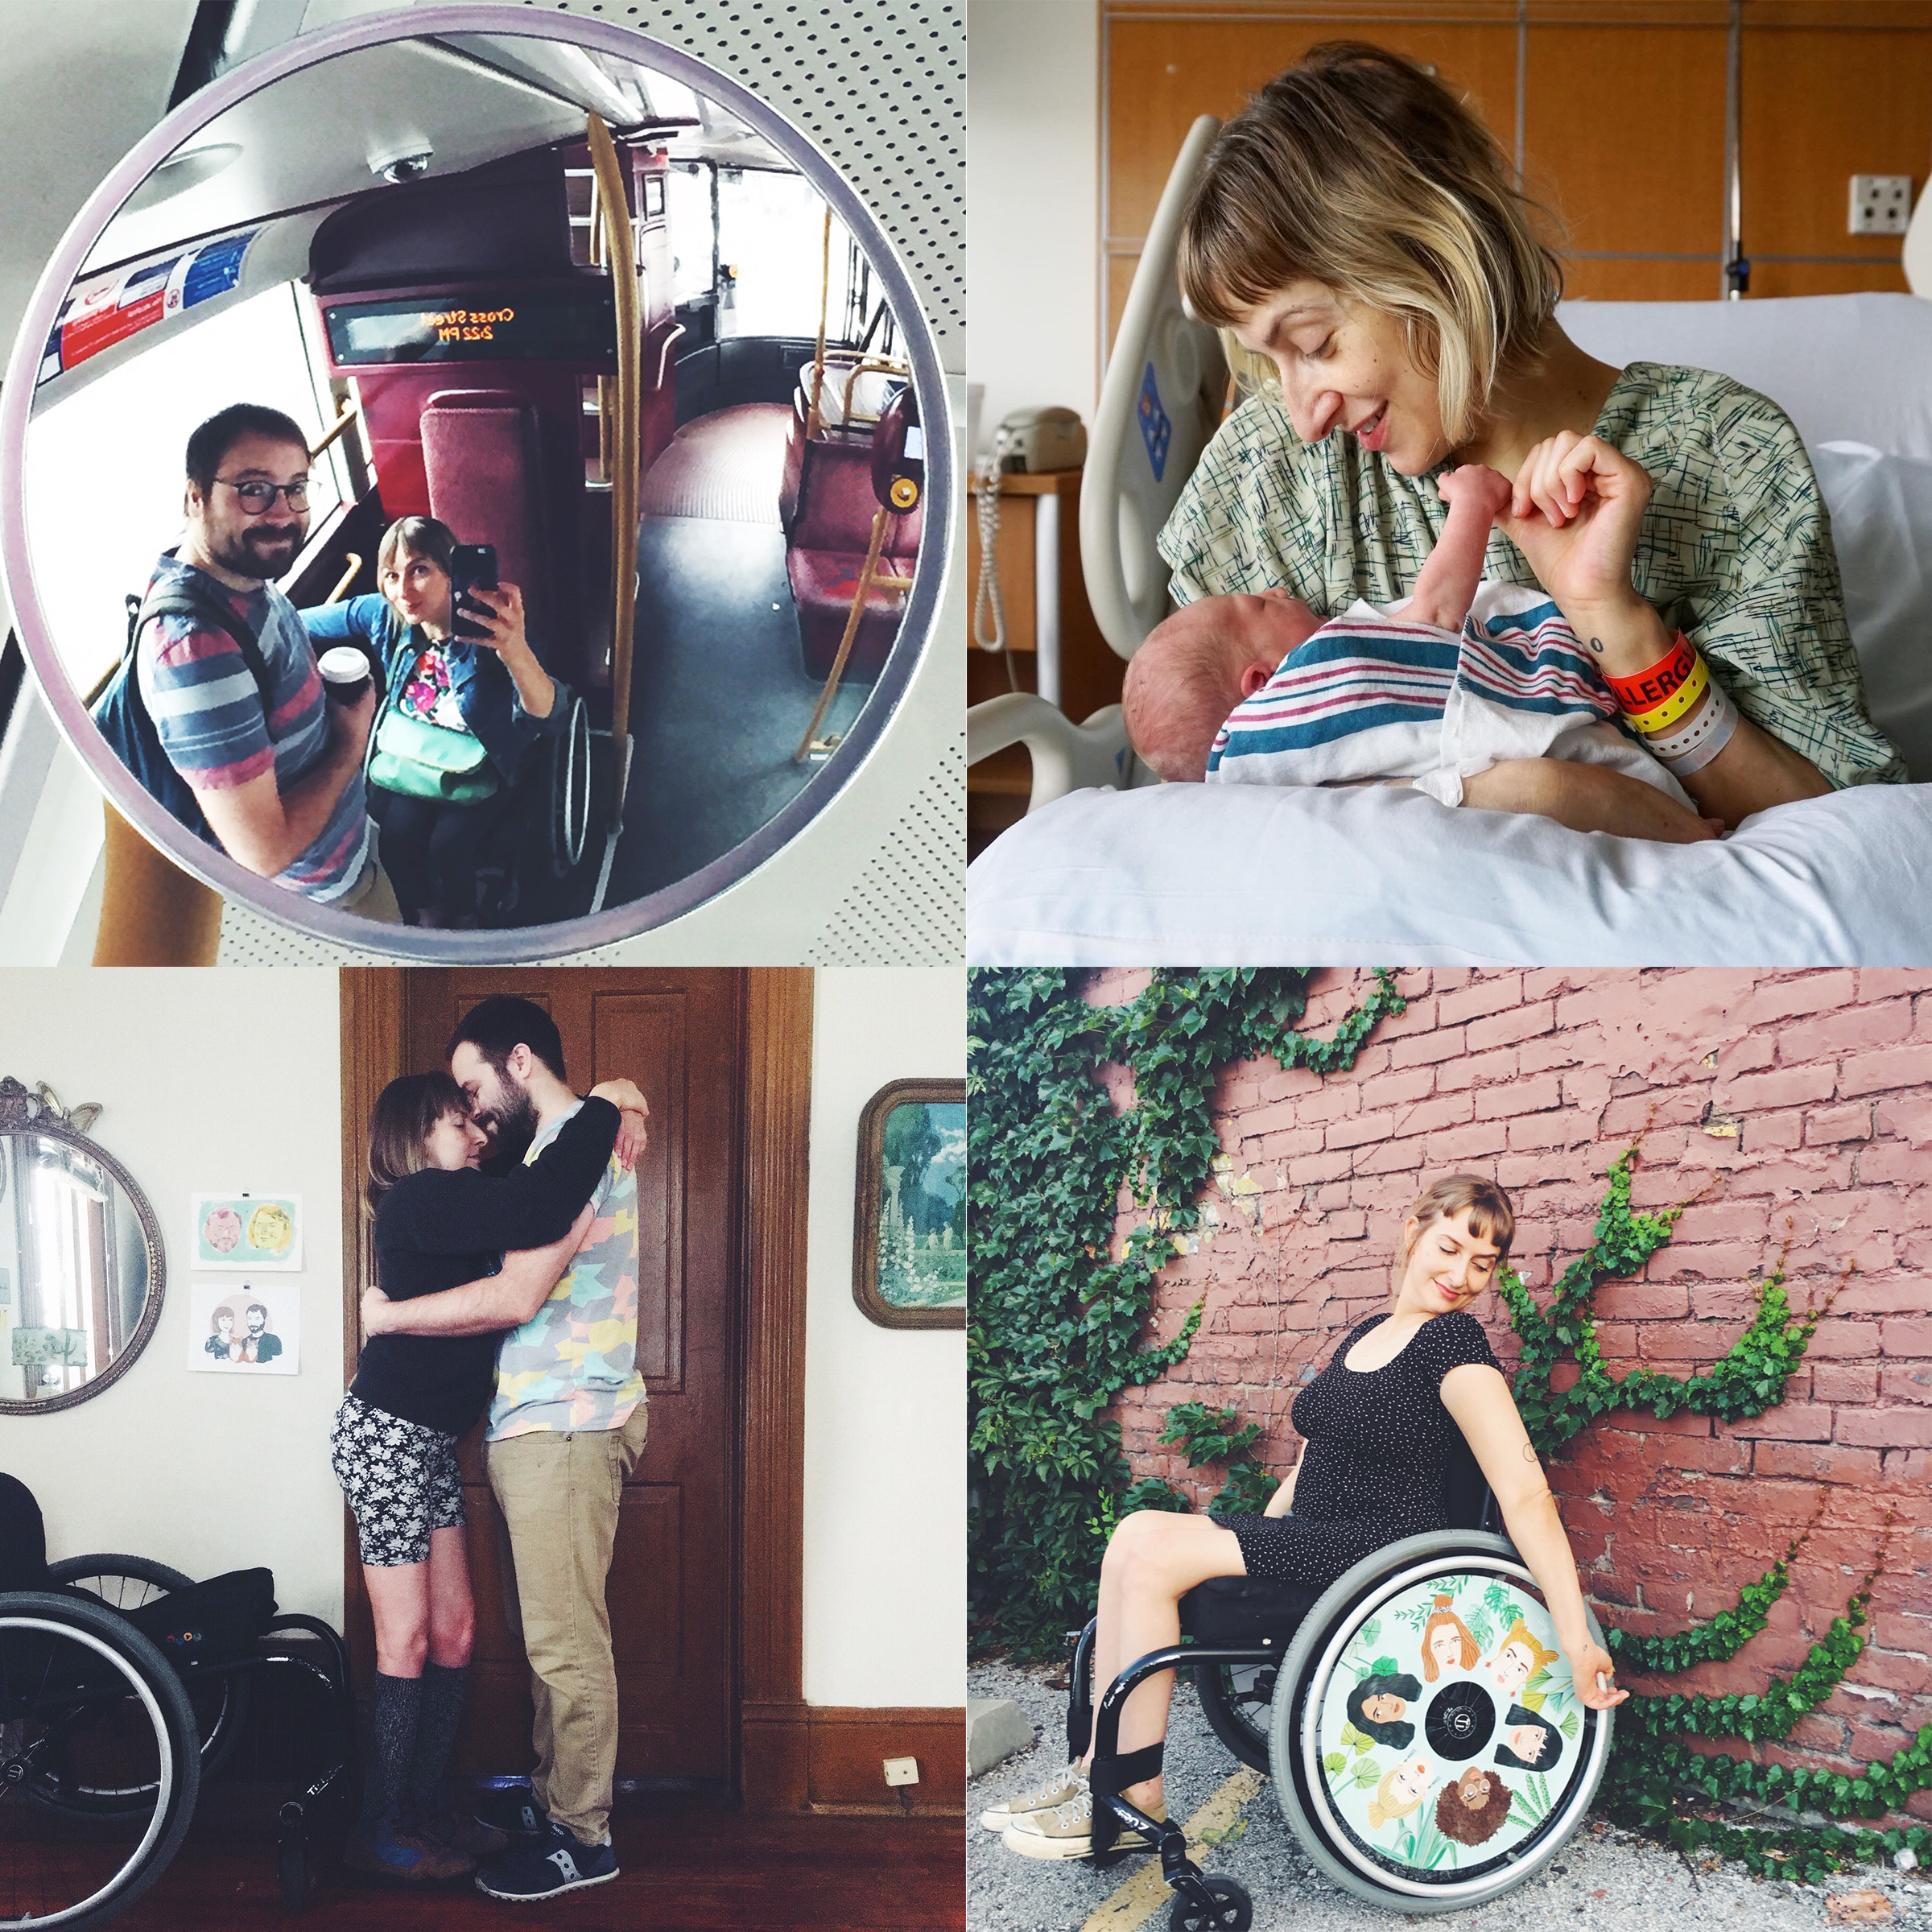 Taussig shares photos and “mini memoirs” narrating her life, which includes her husband Micah and new baby Otto, on Instagram